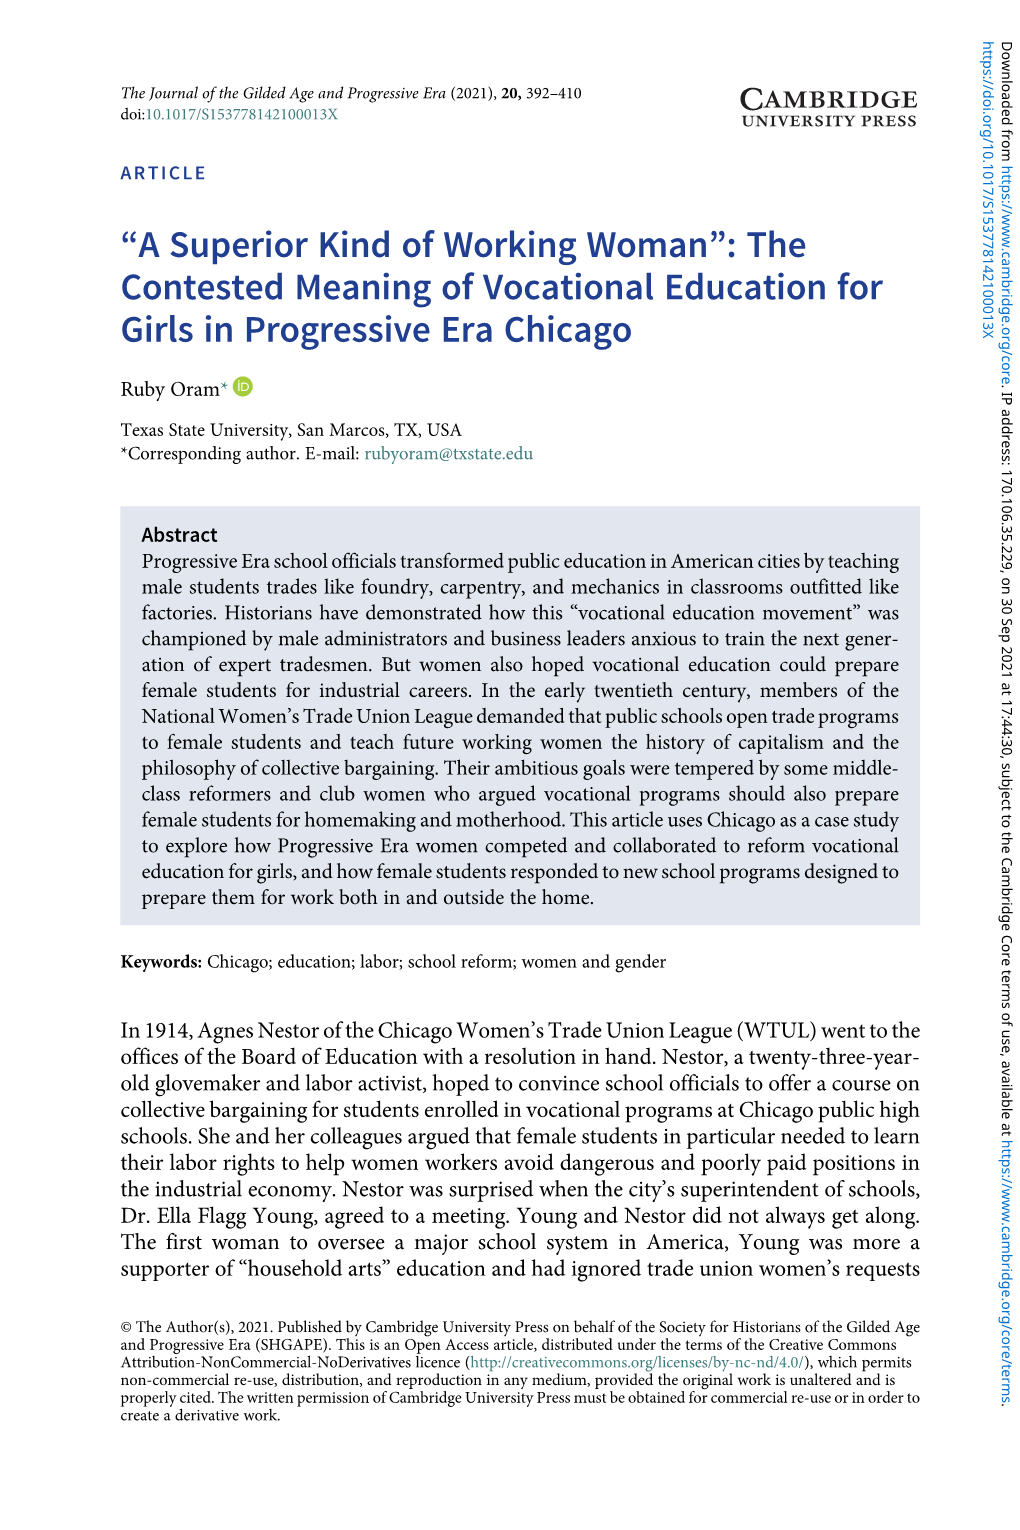 The Contested Meaning of Vocational Education for Girls in Progressive Era Chicago